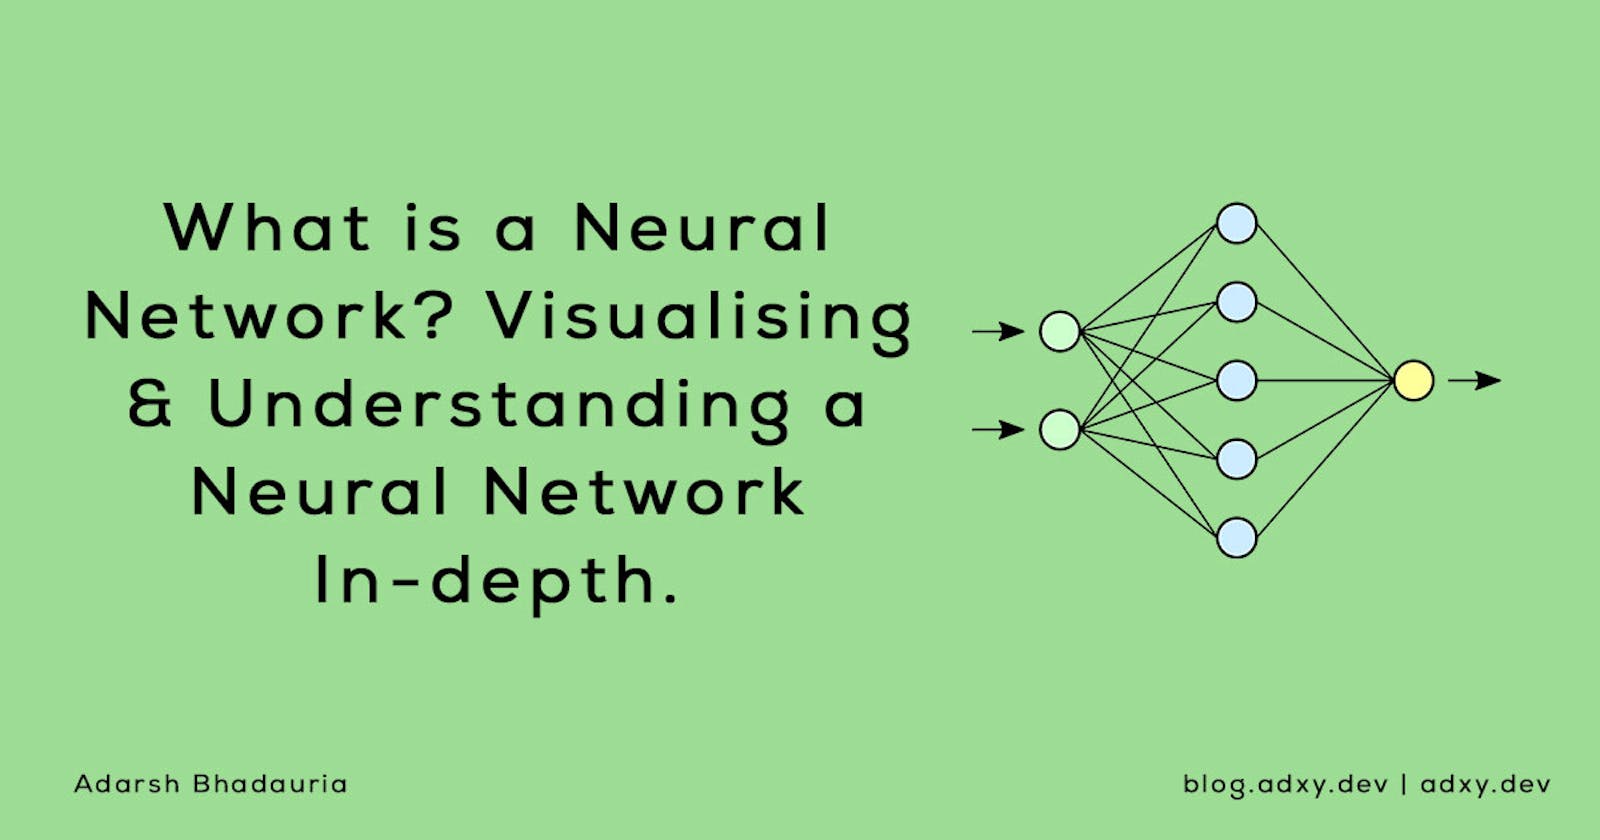 What is a Neural Network? Visualising & Understanding a Neural Network In-depth.